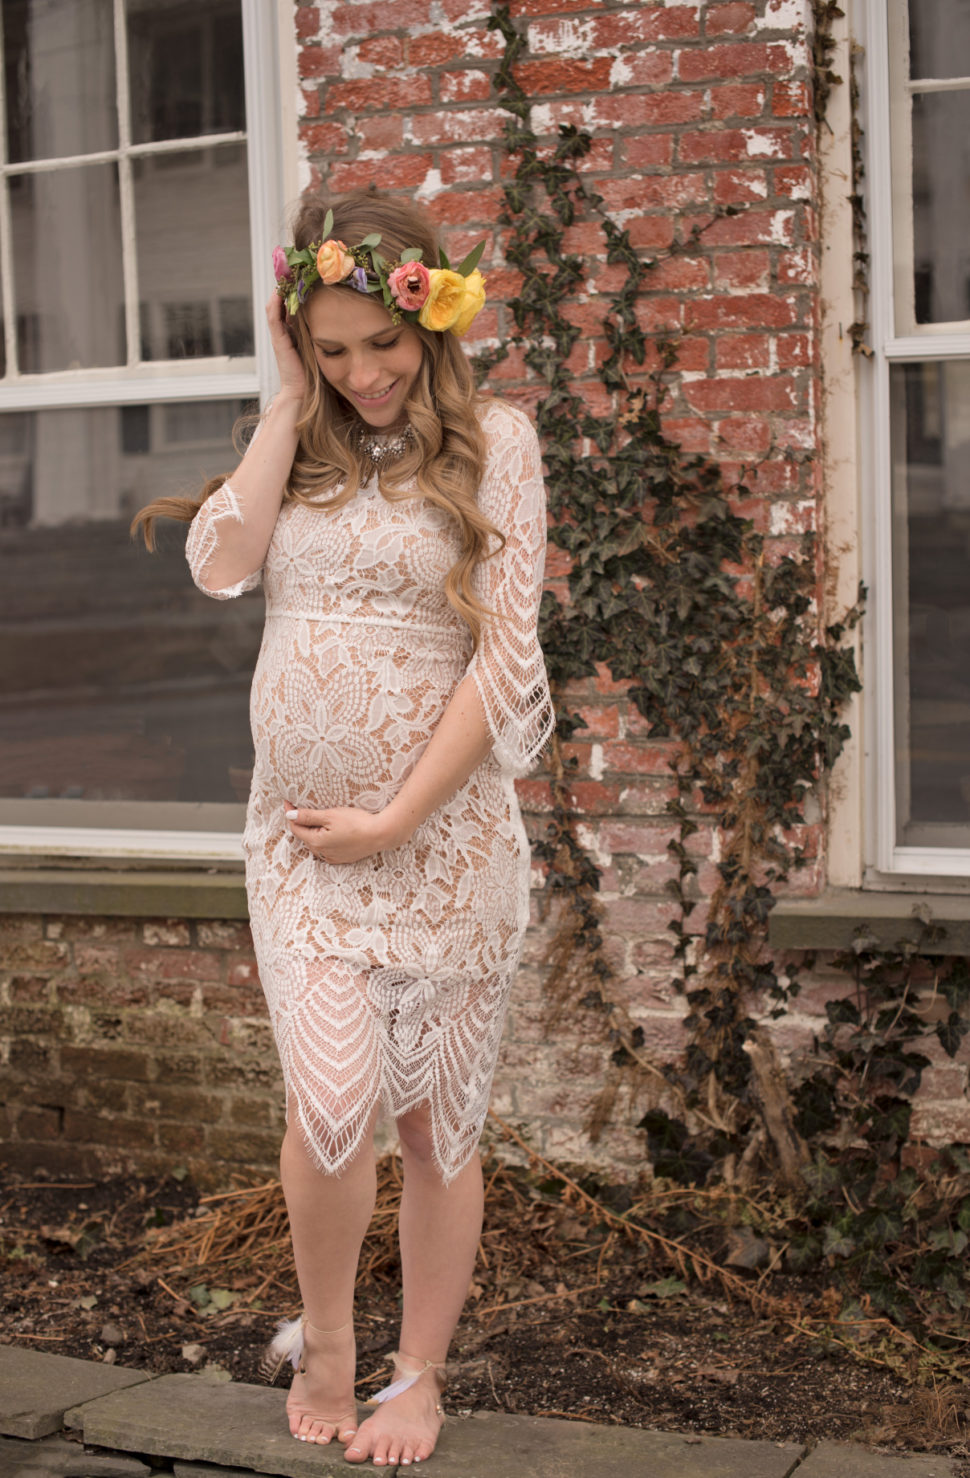 Medium Size of Baby Shower:sturdy Stylish Maternity Dresses For Baby Shower Picture Ideas Stylish Maternity Dresses For Baby Shower As Well As Baby Shower Gift Message With Practical Baby Shower Gifts Plus Baby Shower Cards For Boy Together With Baby Shower Cake Designs